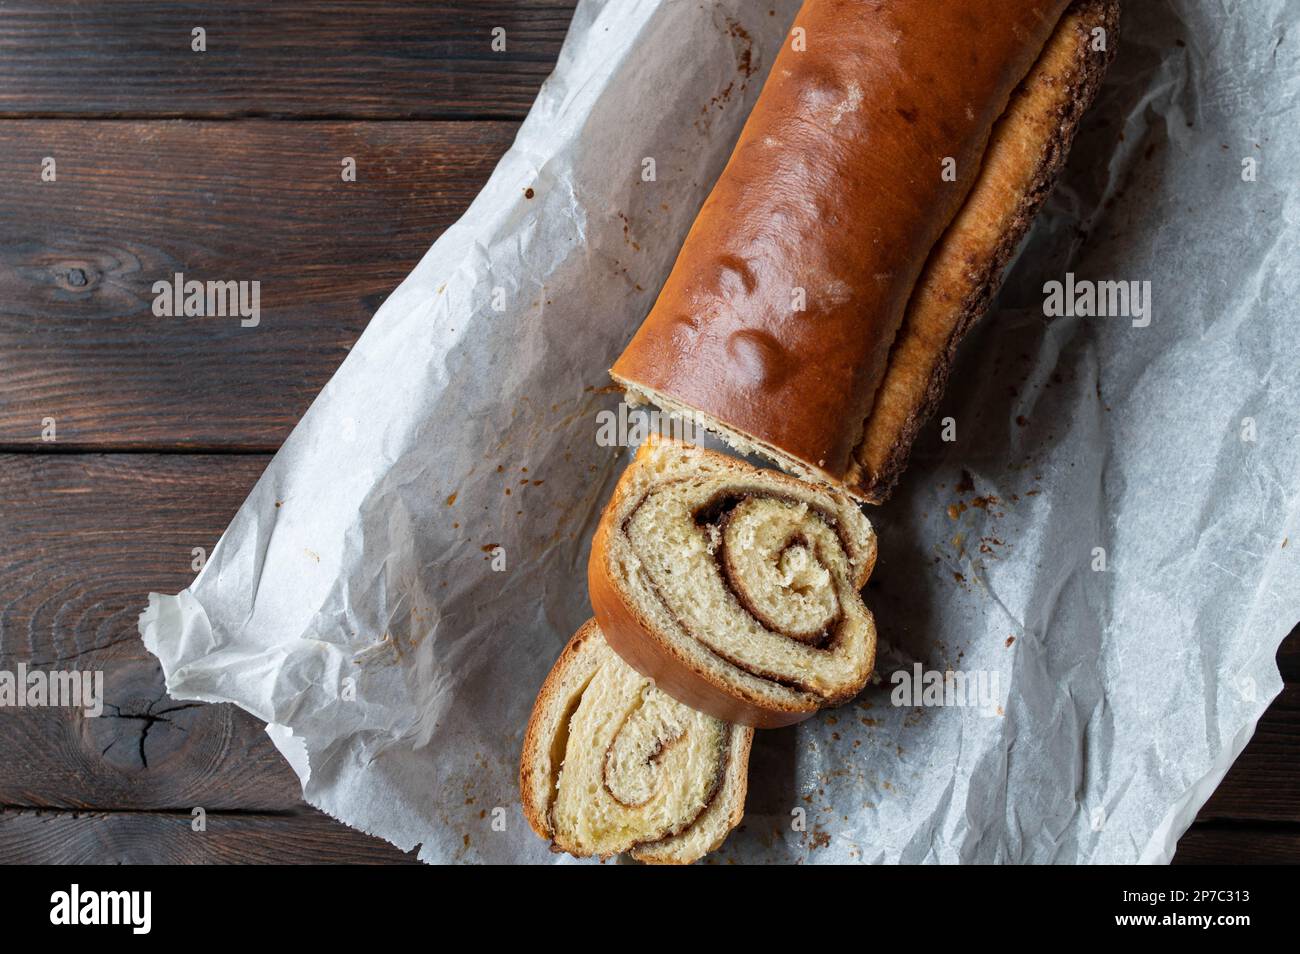 Loaf of yeast cake with cinnamon roll filling isolated on dark wooden table. Flat lay Stock Photo